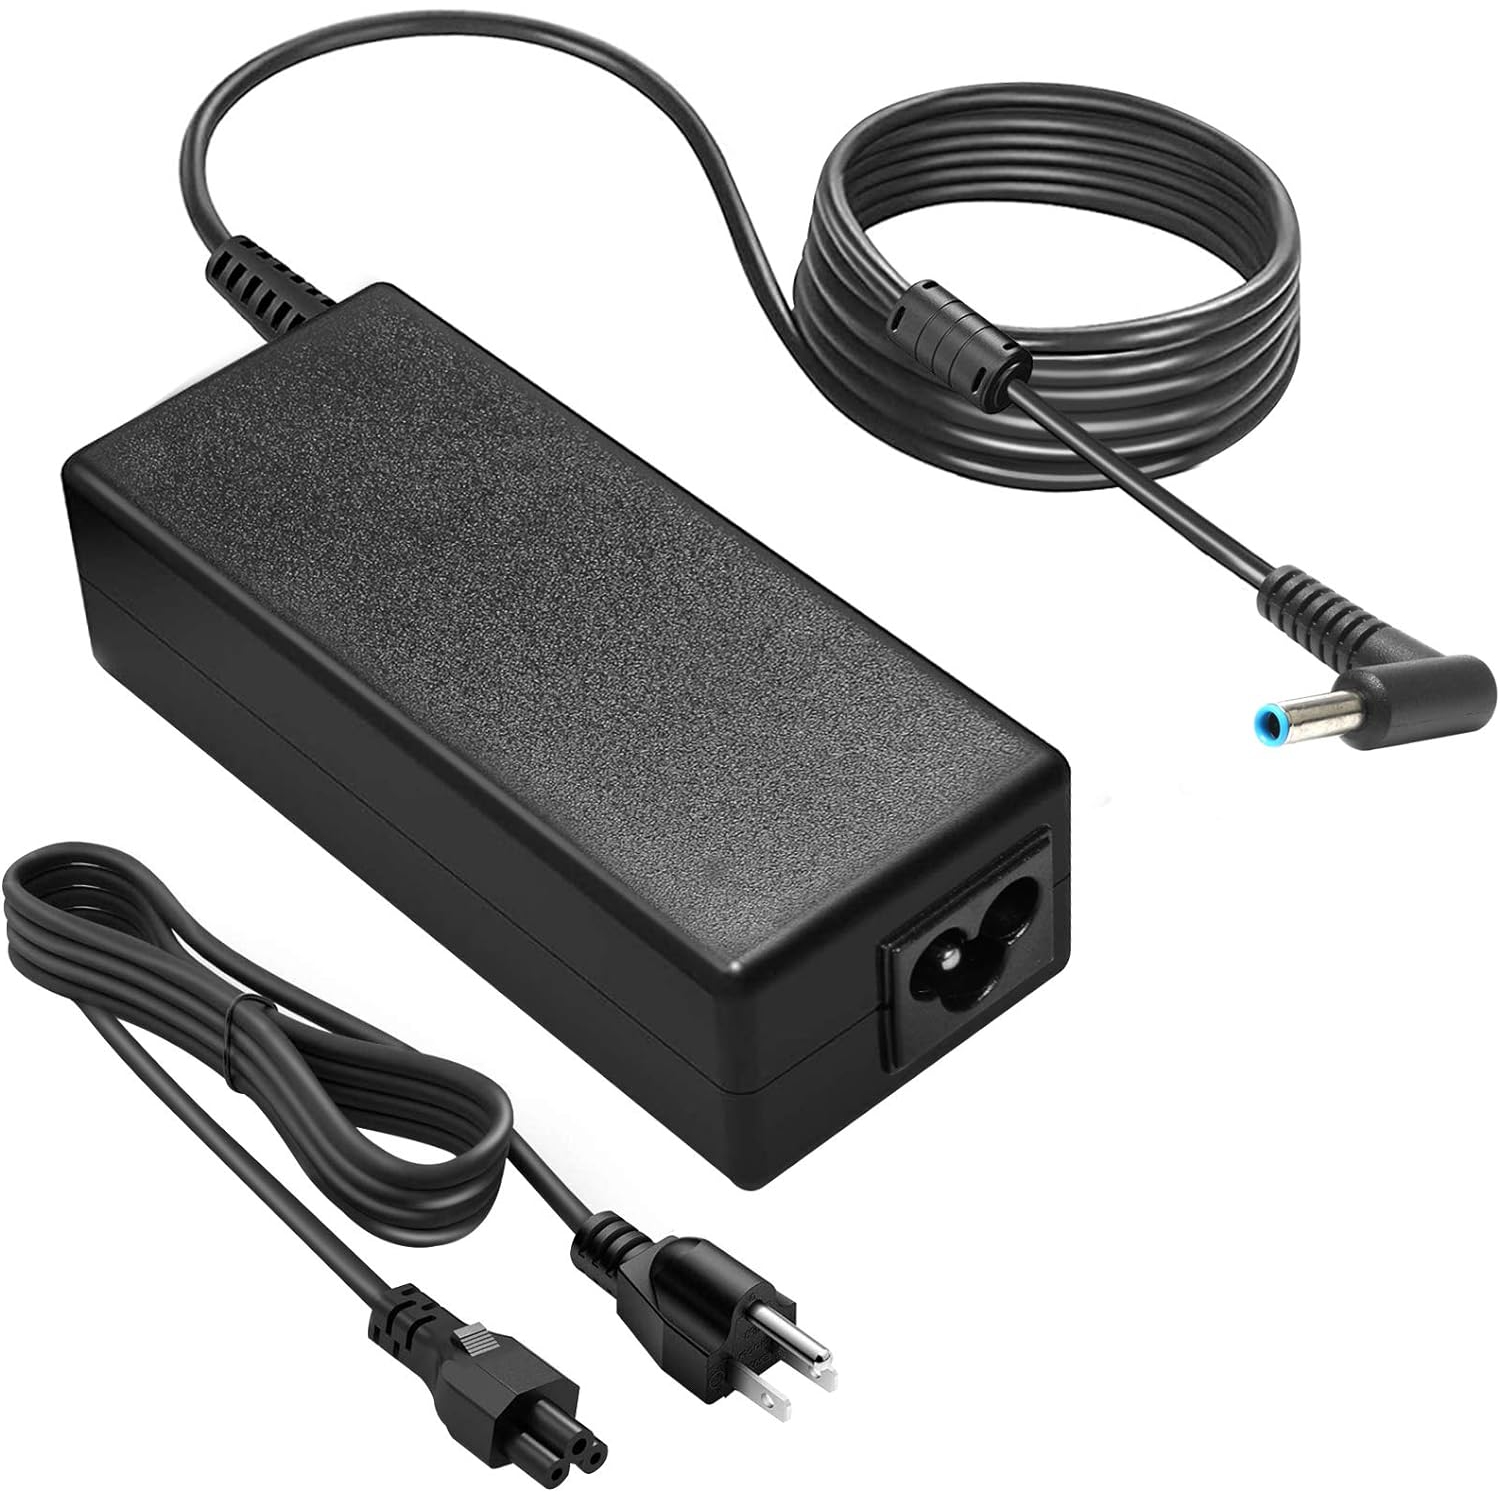 Laptop Charger 65W AC Adapter for HP Pavilion X360 15 17 Stream 11 13 14 Series (All Models) Notebook Computer Laptop